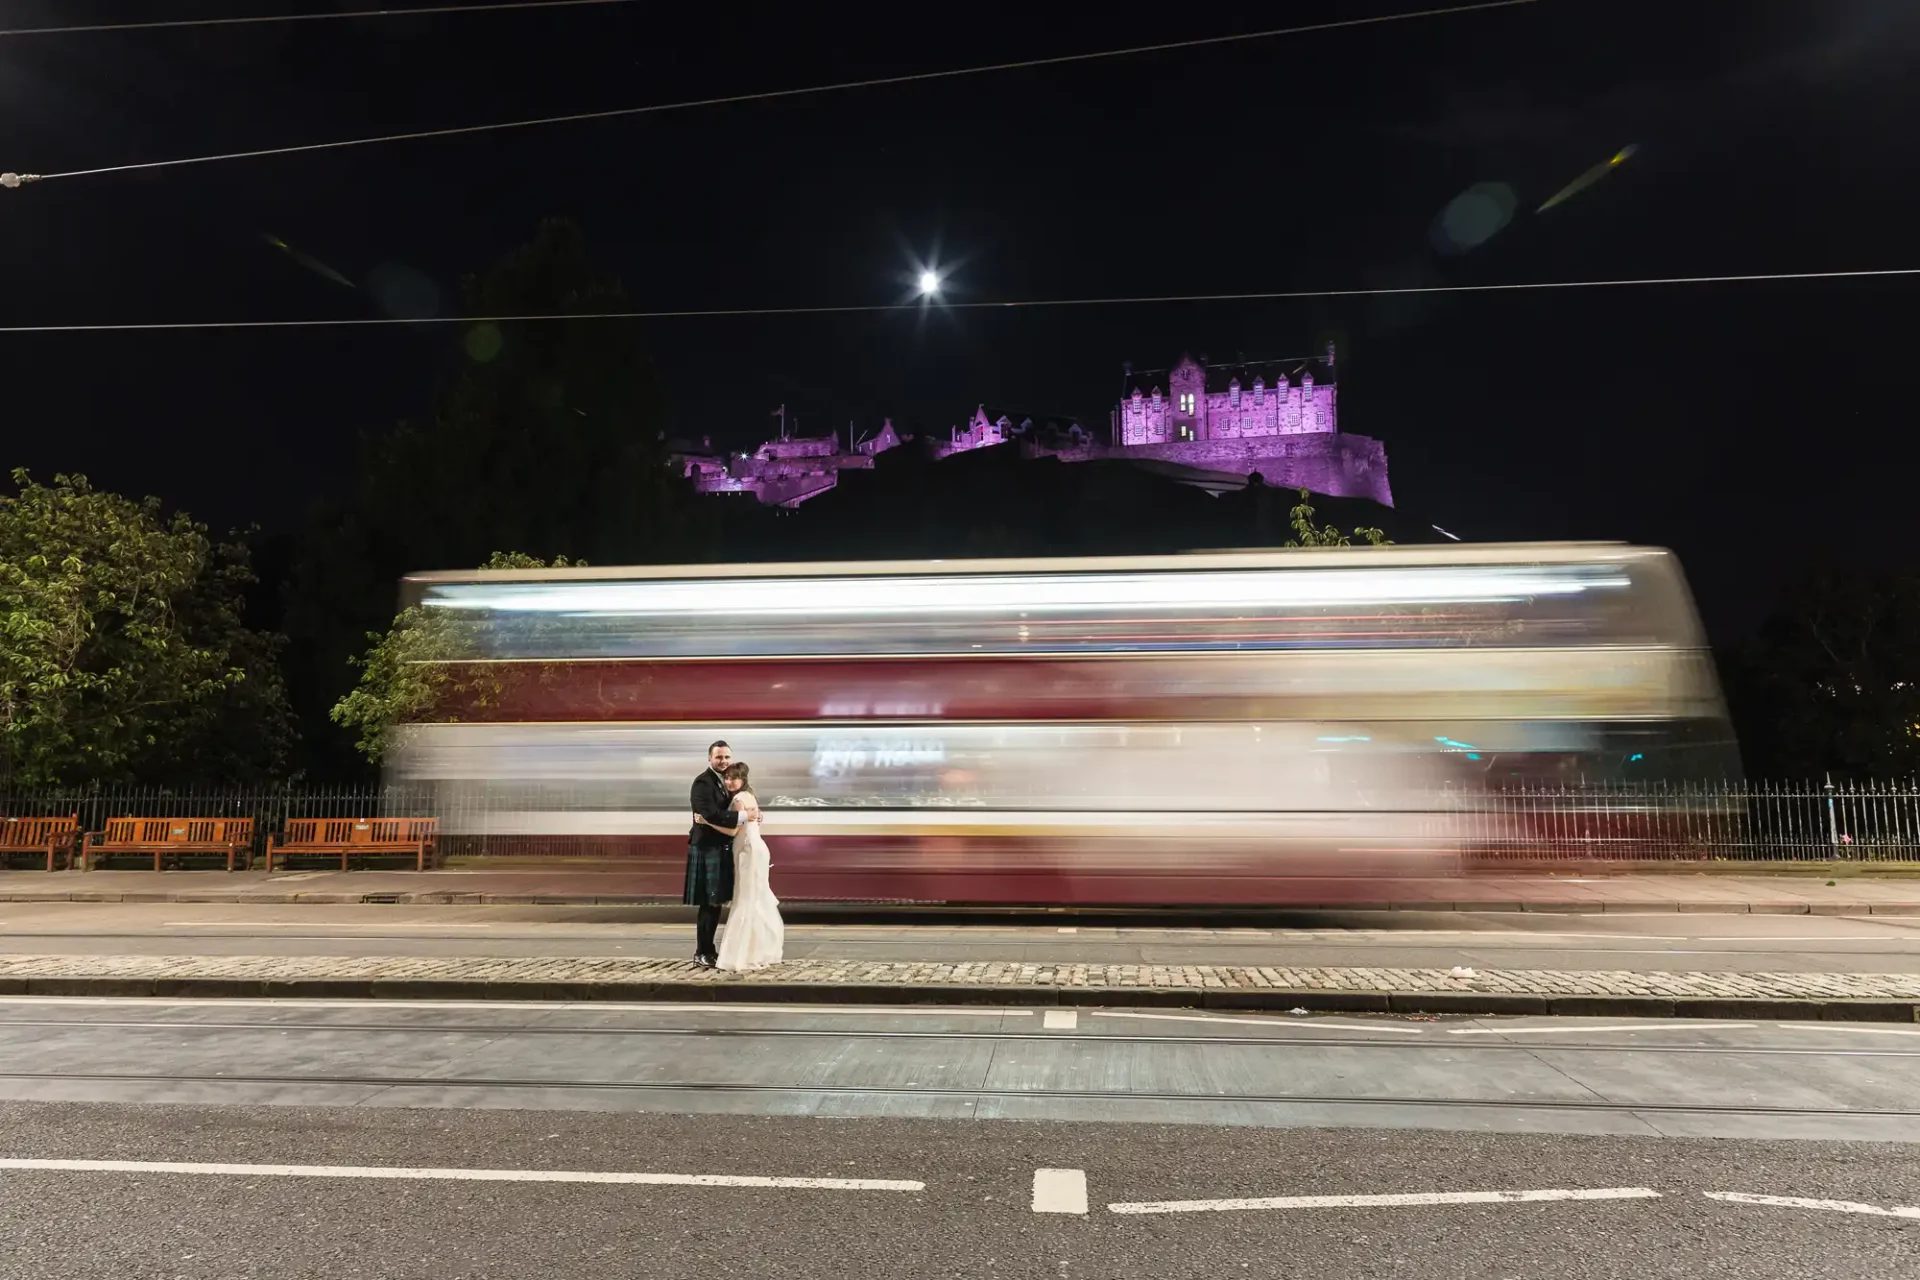 A couple embracing on a city street at night, with a blurred tram passing by and a lit-up castle on a hill in the background.